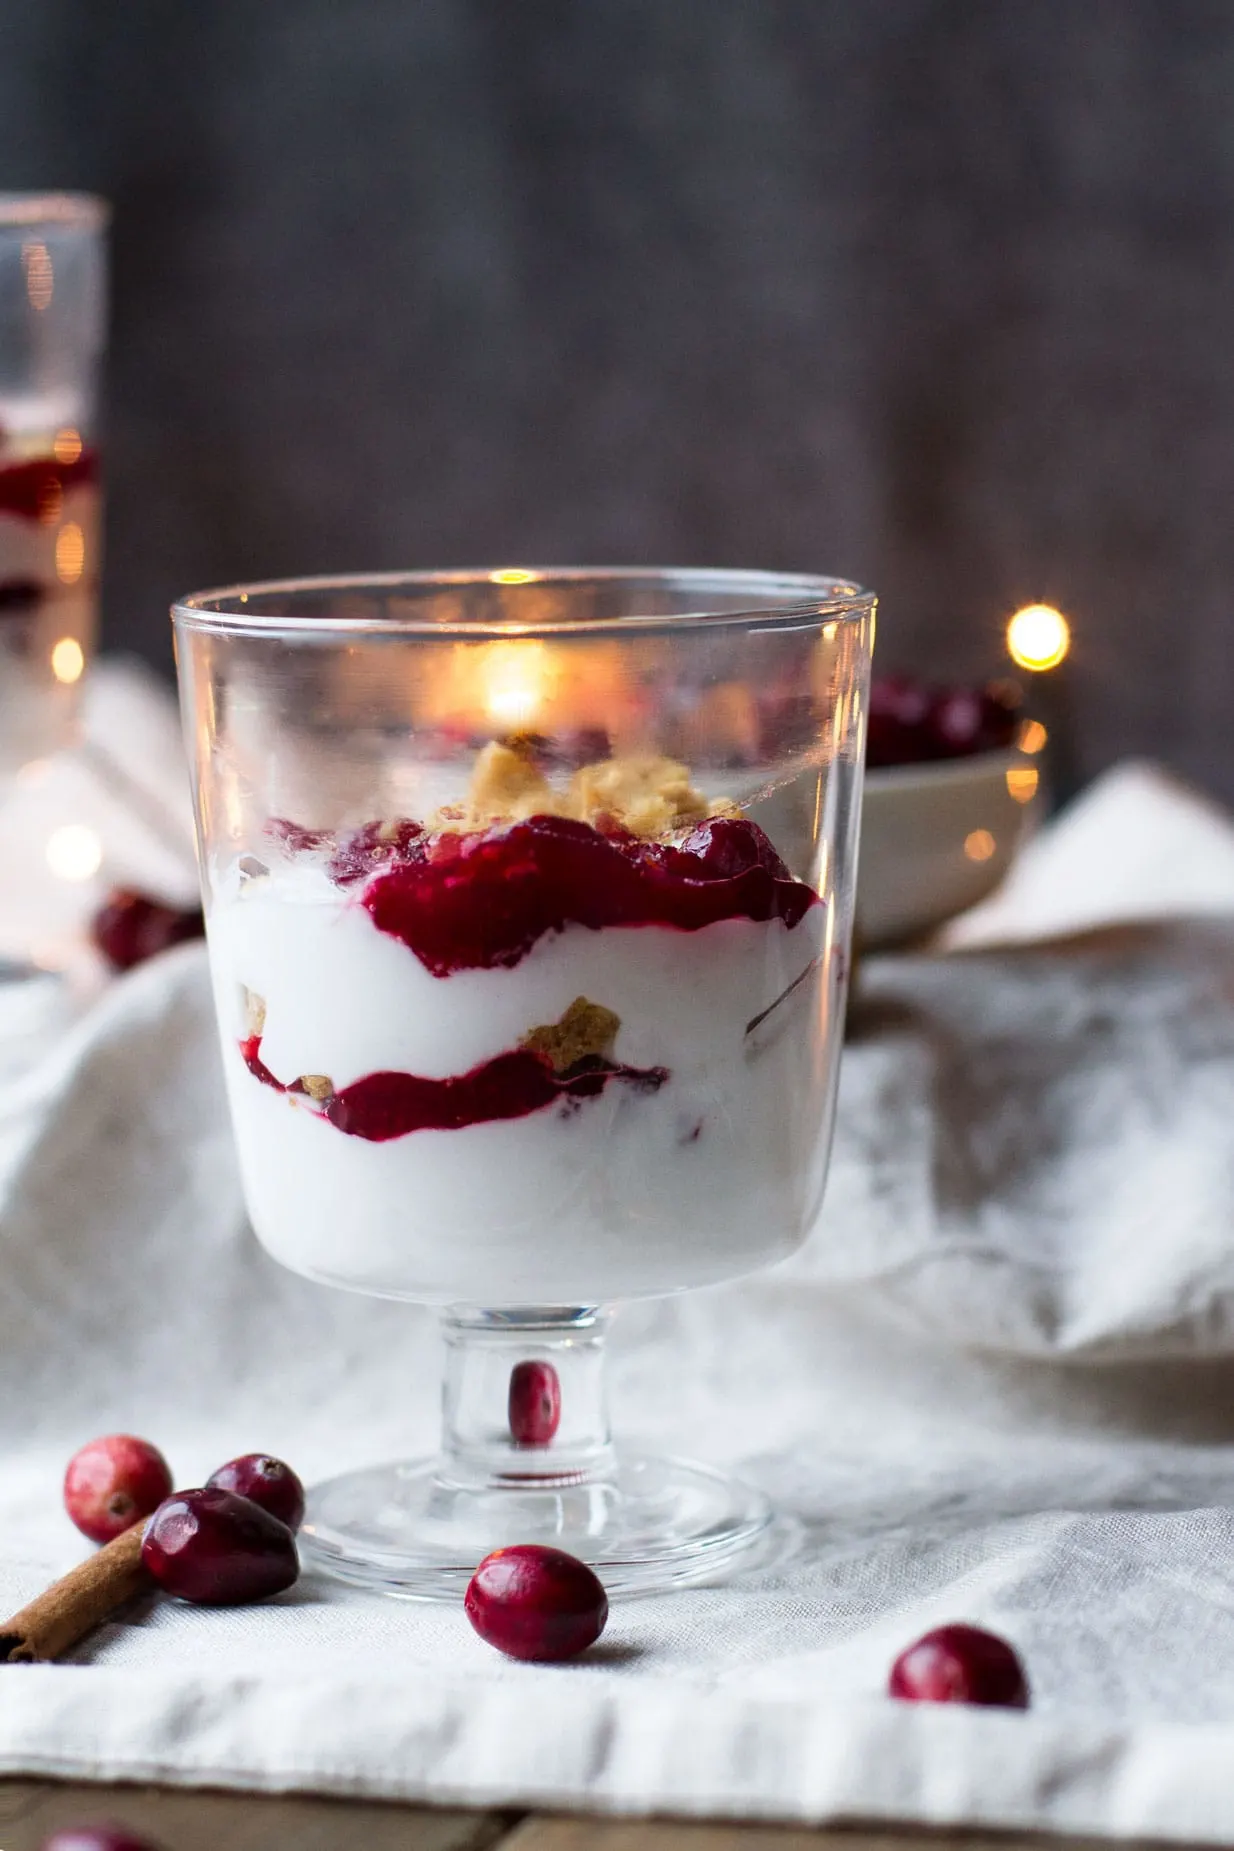 Glass with layers of cranberry sauce, whipped coconut cream and ginger nut cookies. Lights in the background.